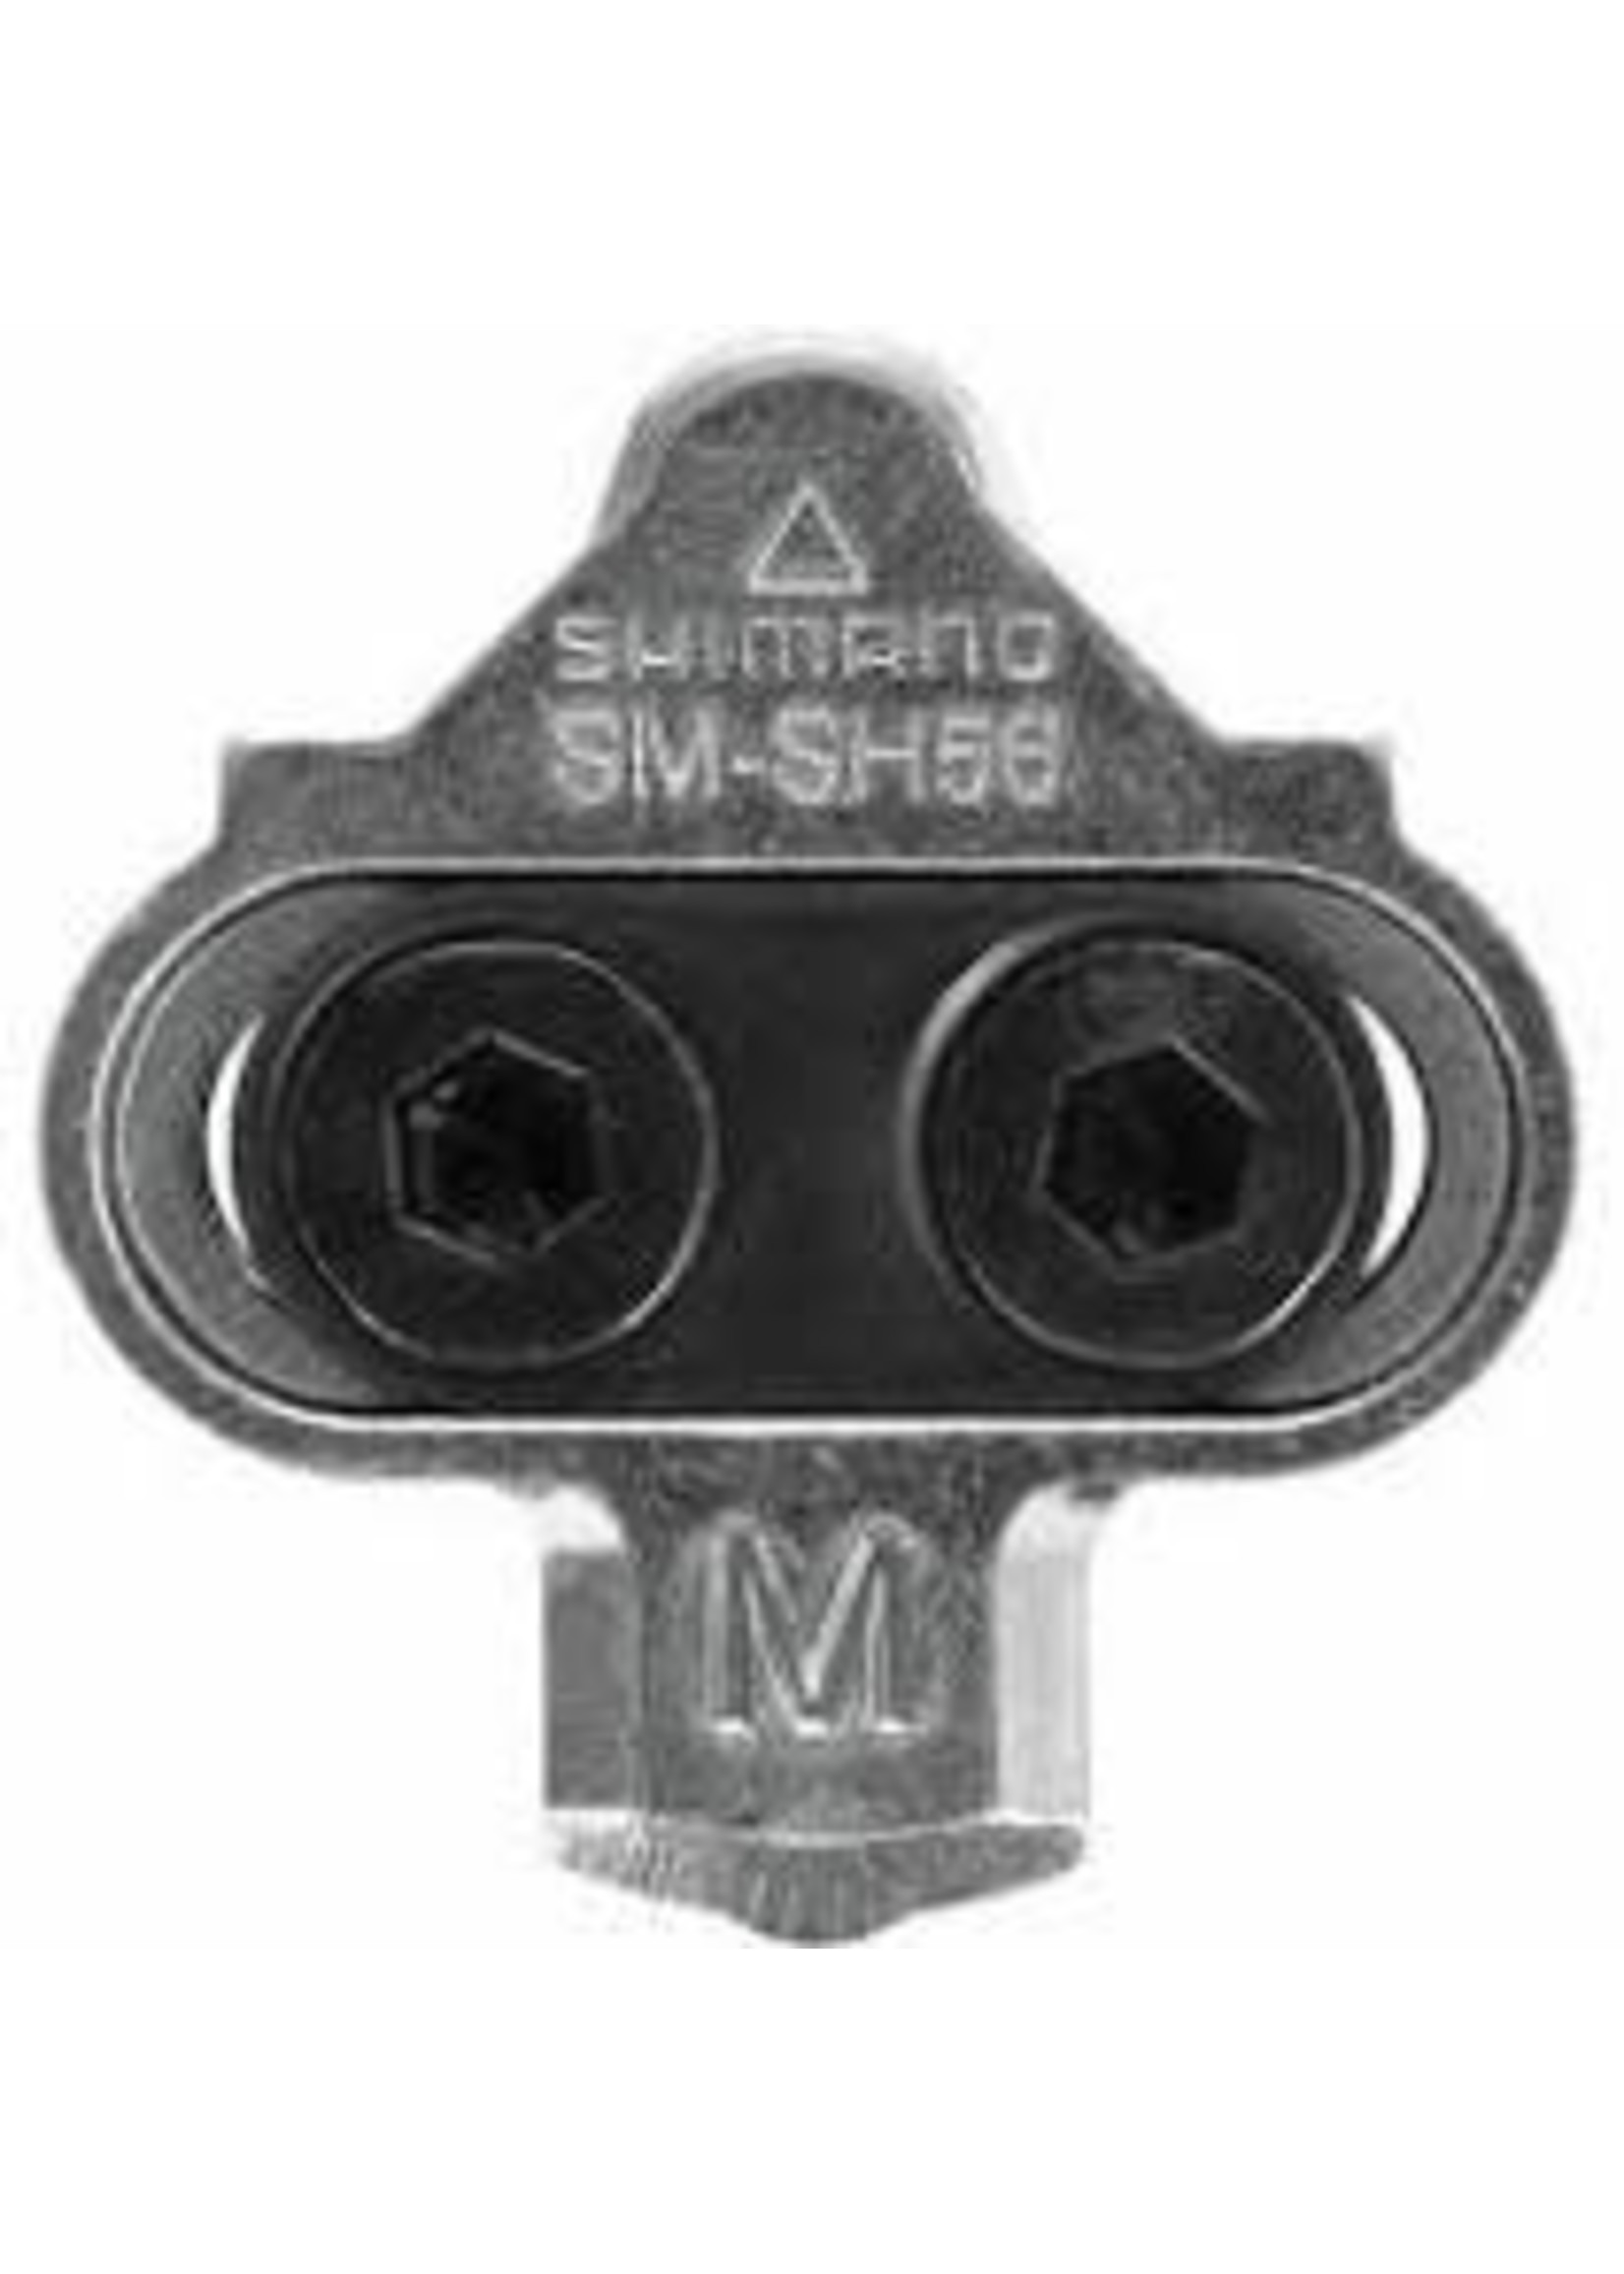 Shimano SM-SH56 CLEAT ASSEMBLY,PAIR W/O CLEAT NUTS,MULTI-RELEASE